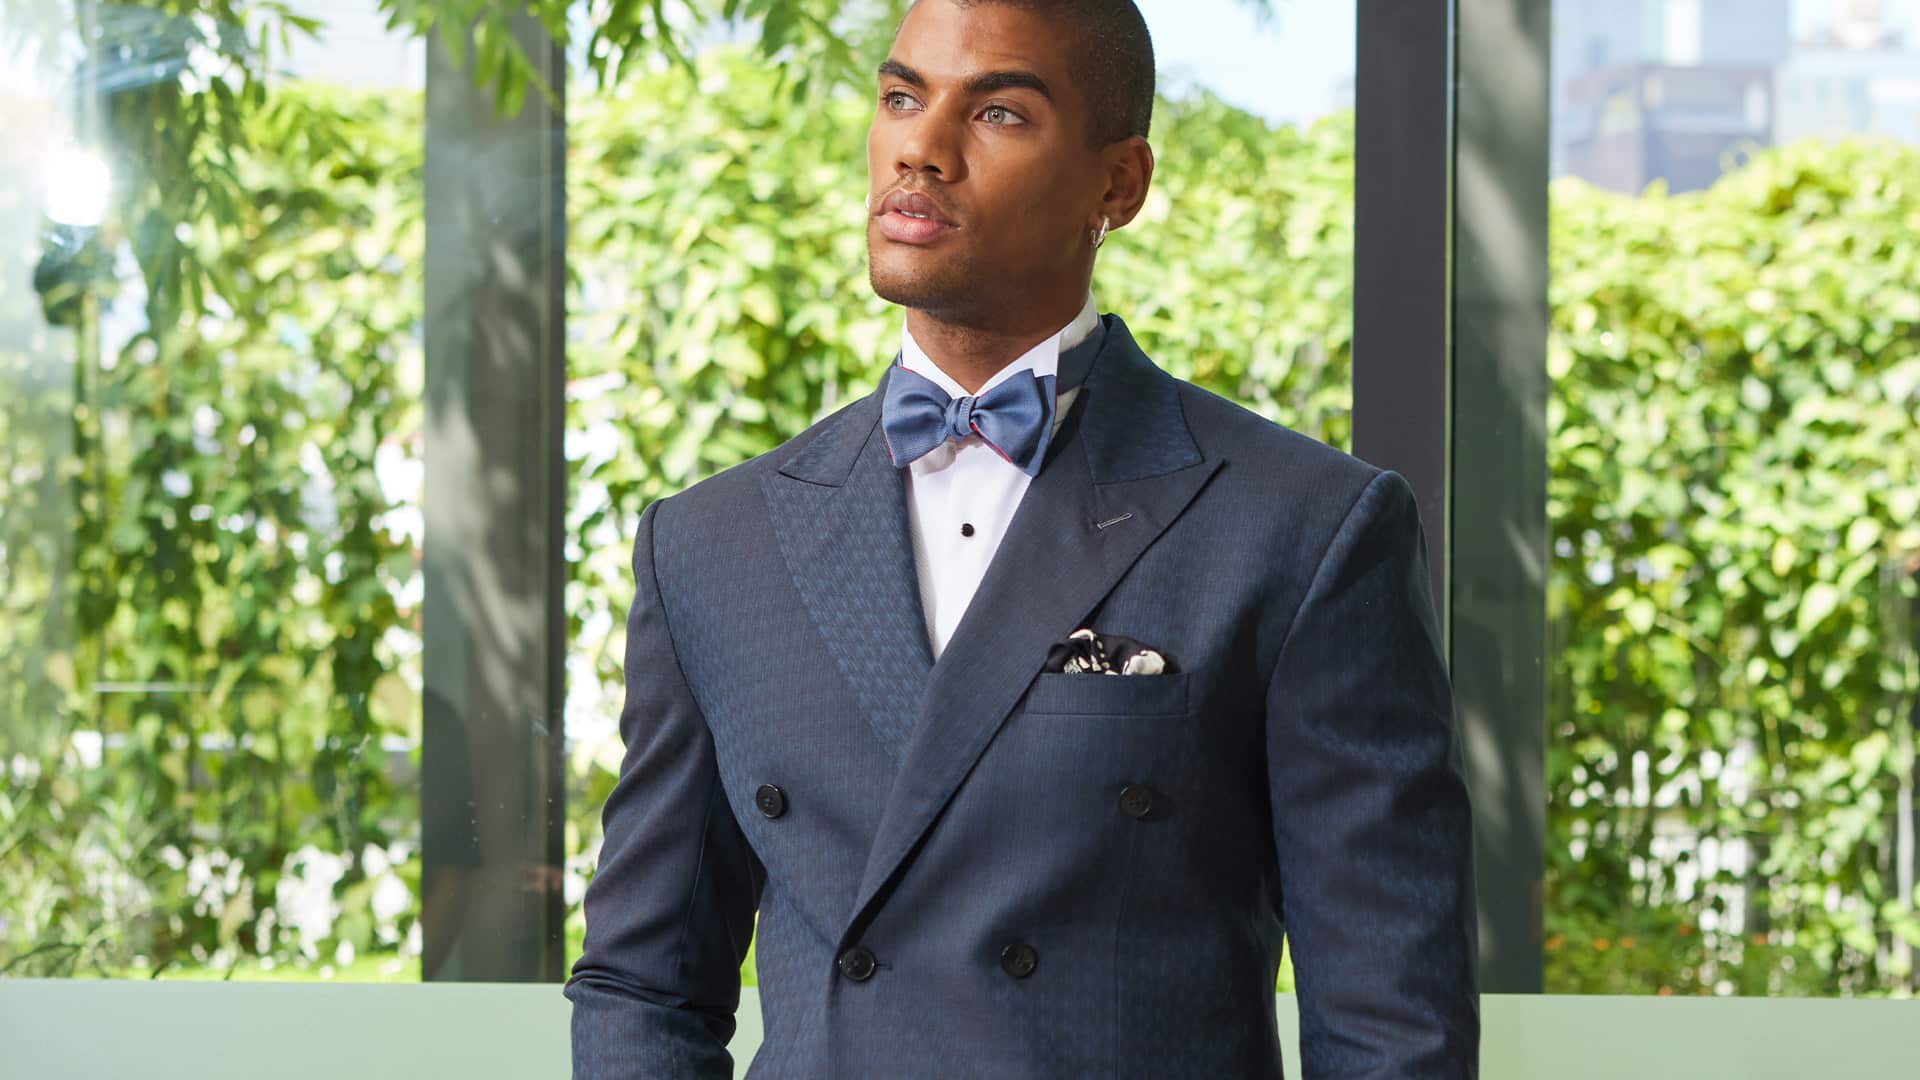 OP2543 Prism is a different take on the tuxedo, giving it a more contemporary attitude.